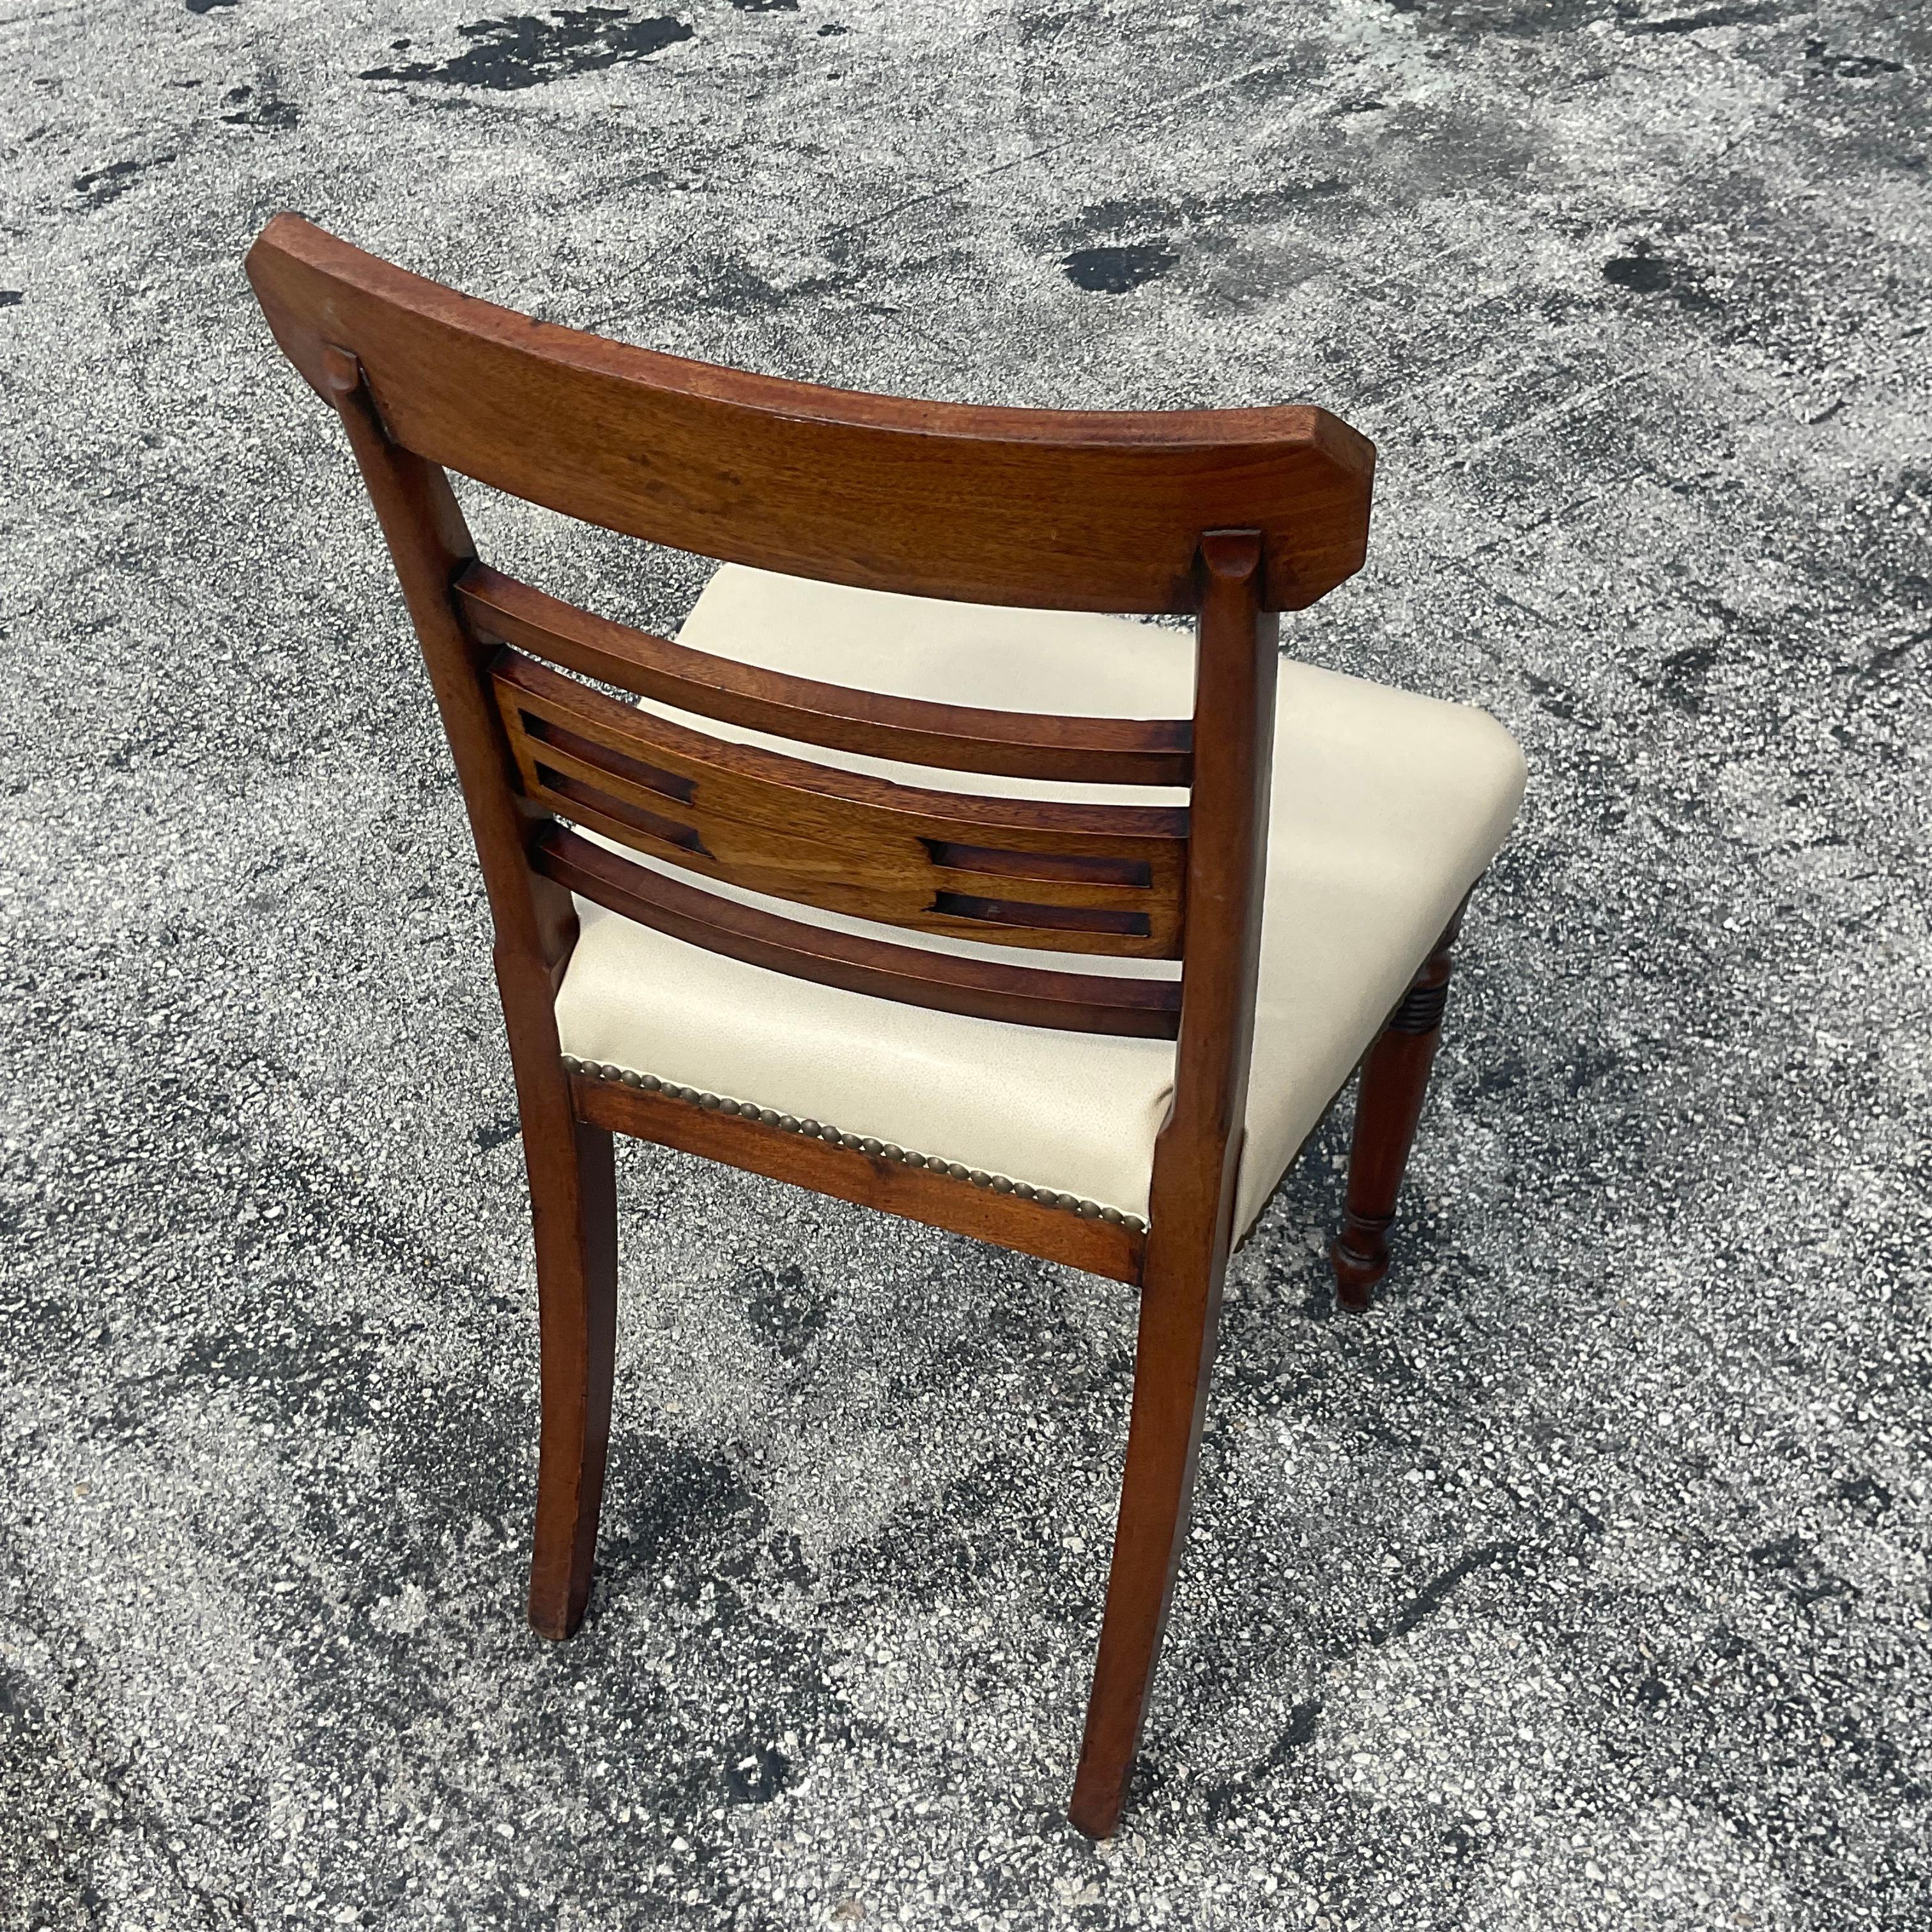 20th Century Vintage Regency Inlaid Mahogany Dining Chairs - Set of 8 For Sale